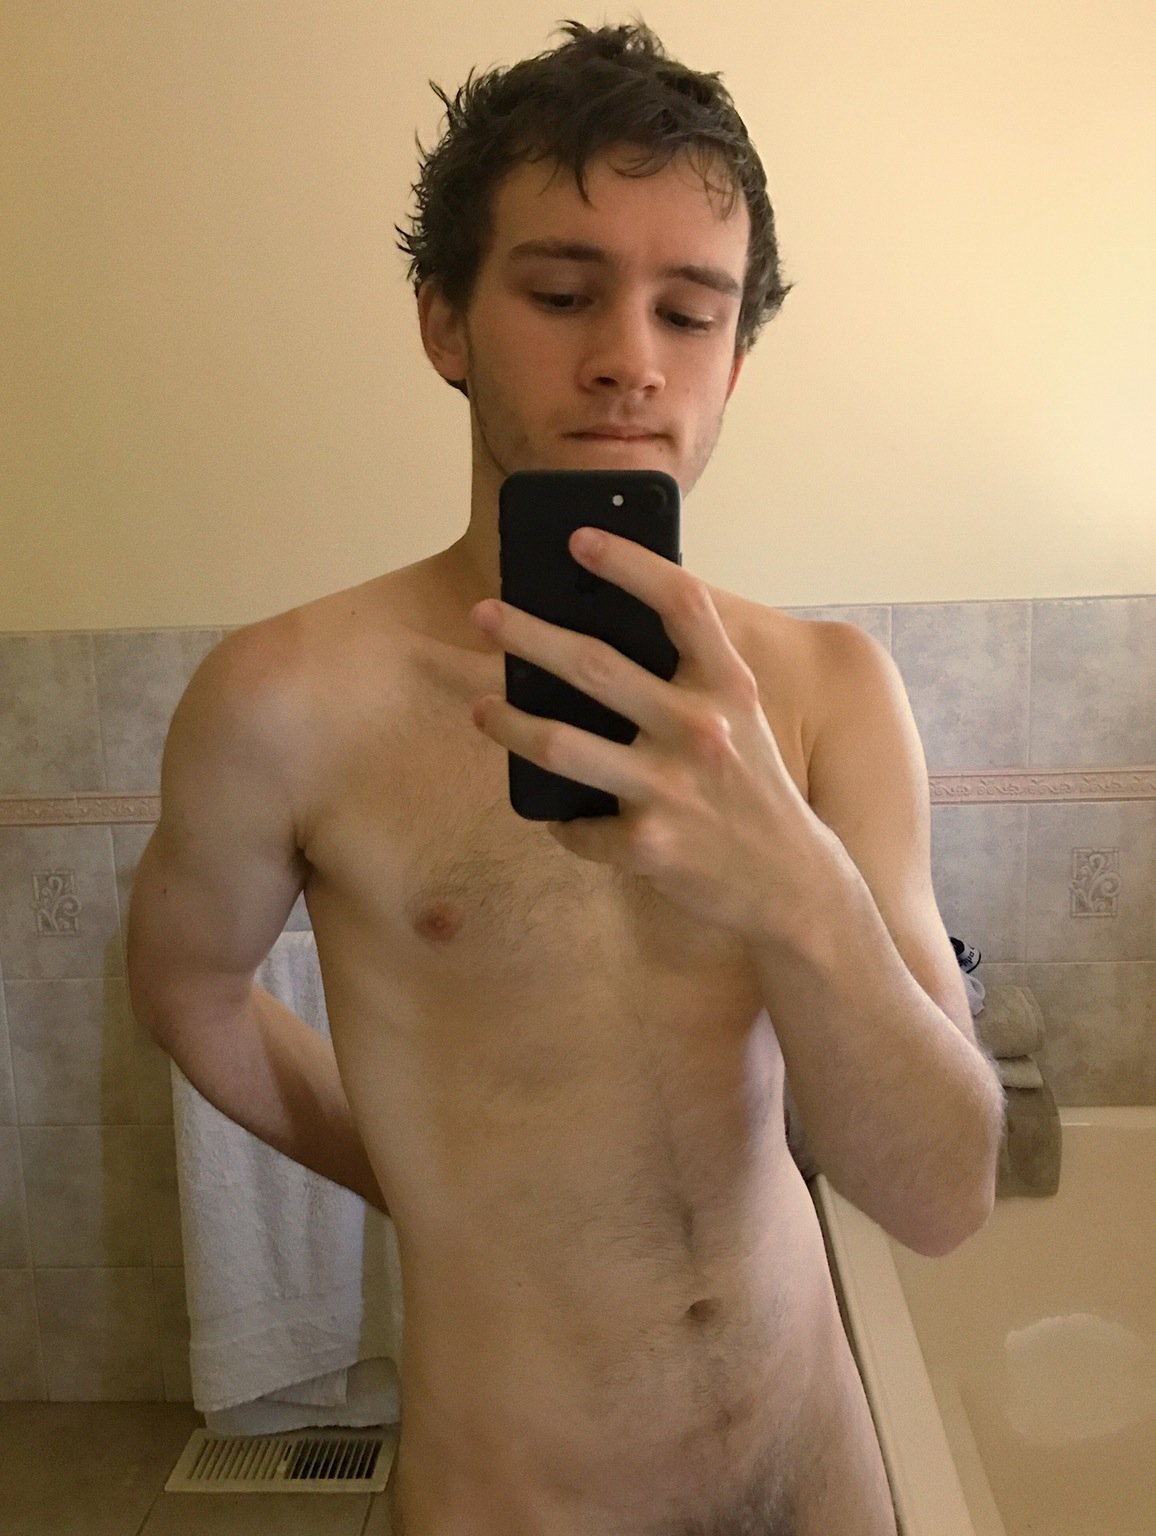 Body hair is slowly coming back